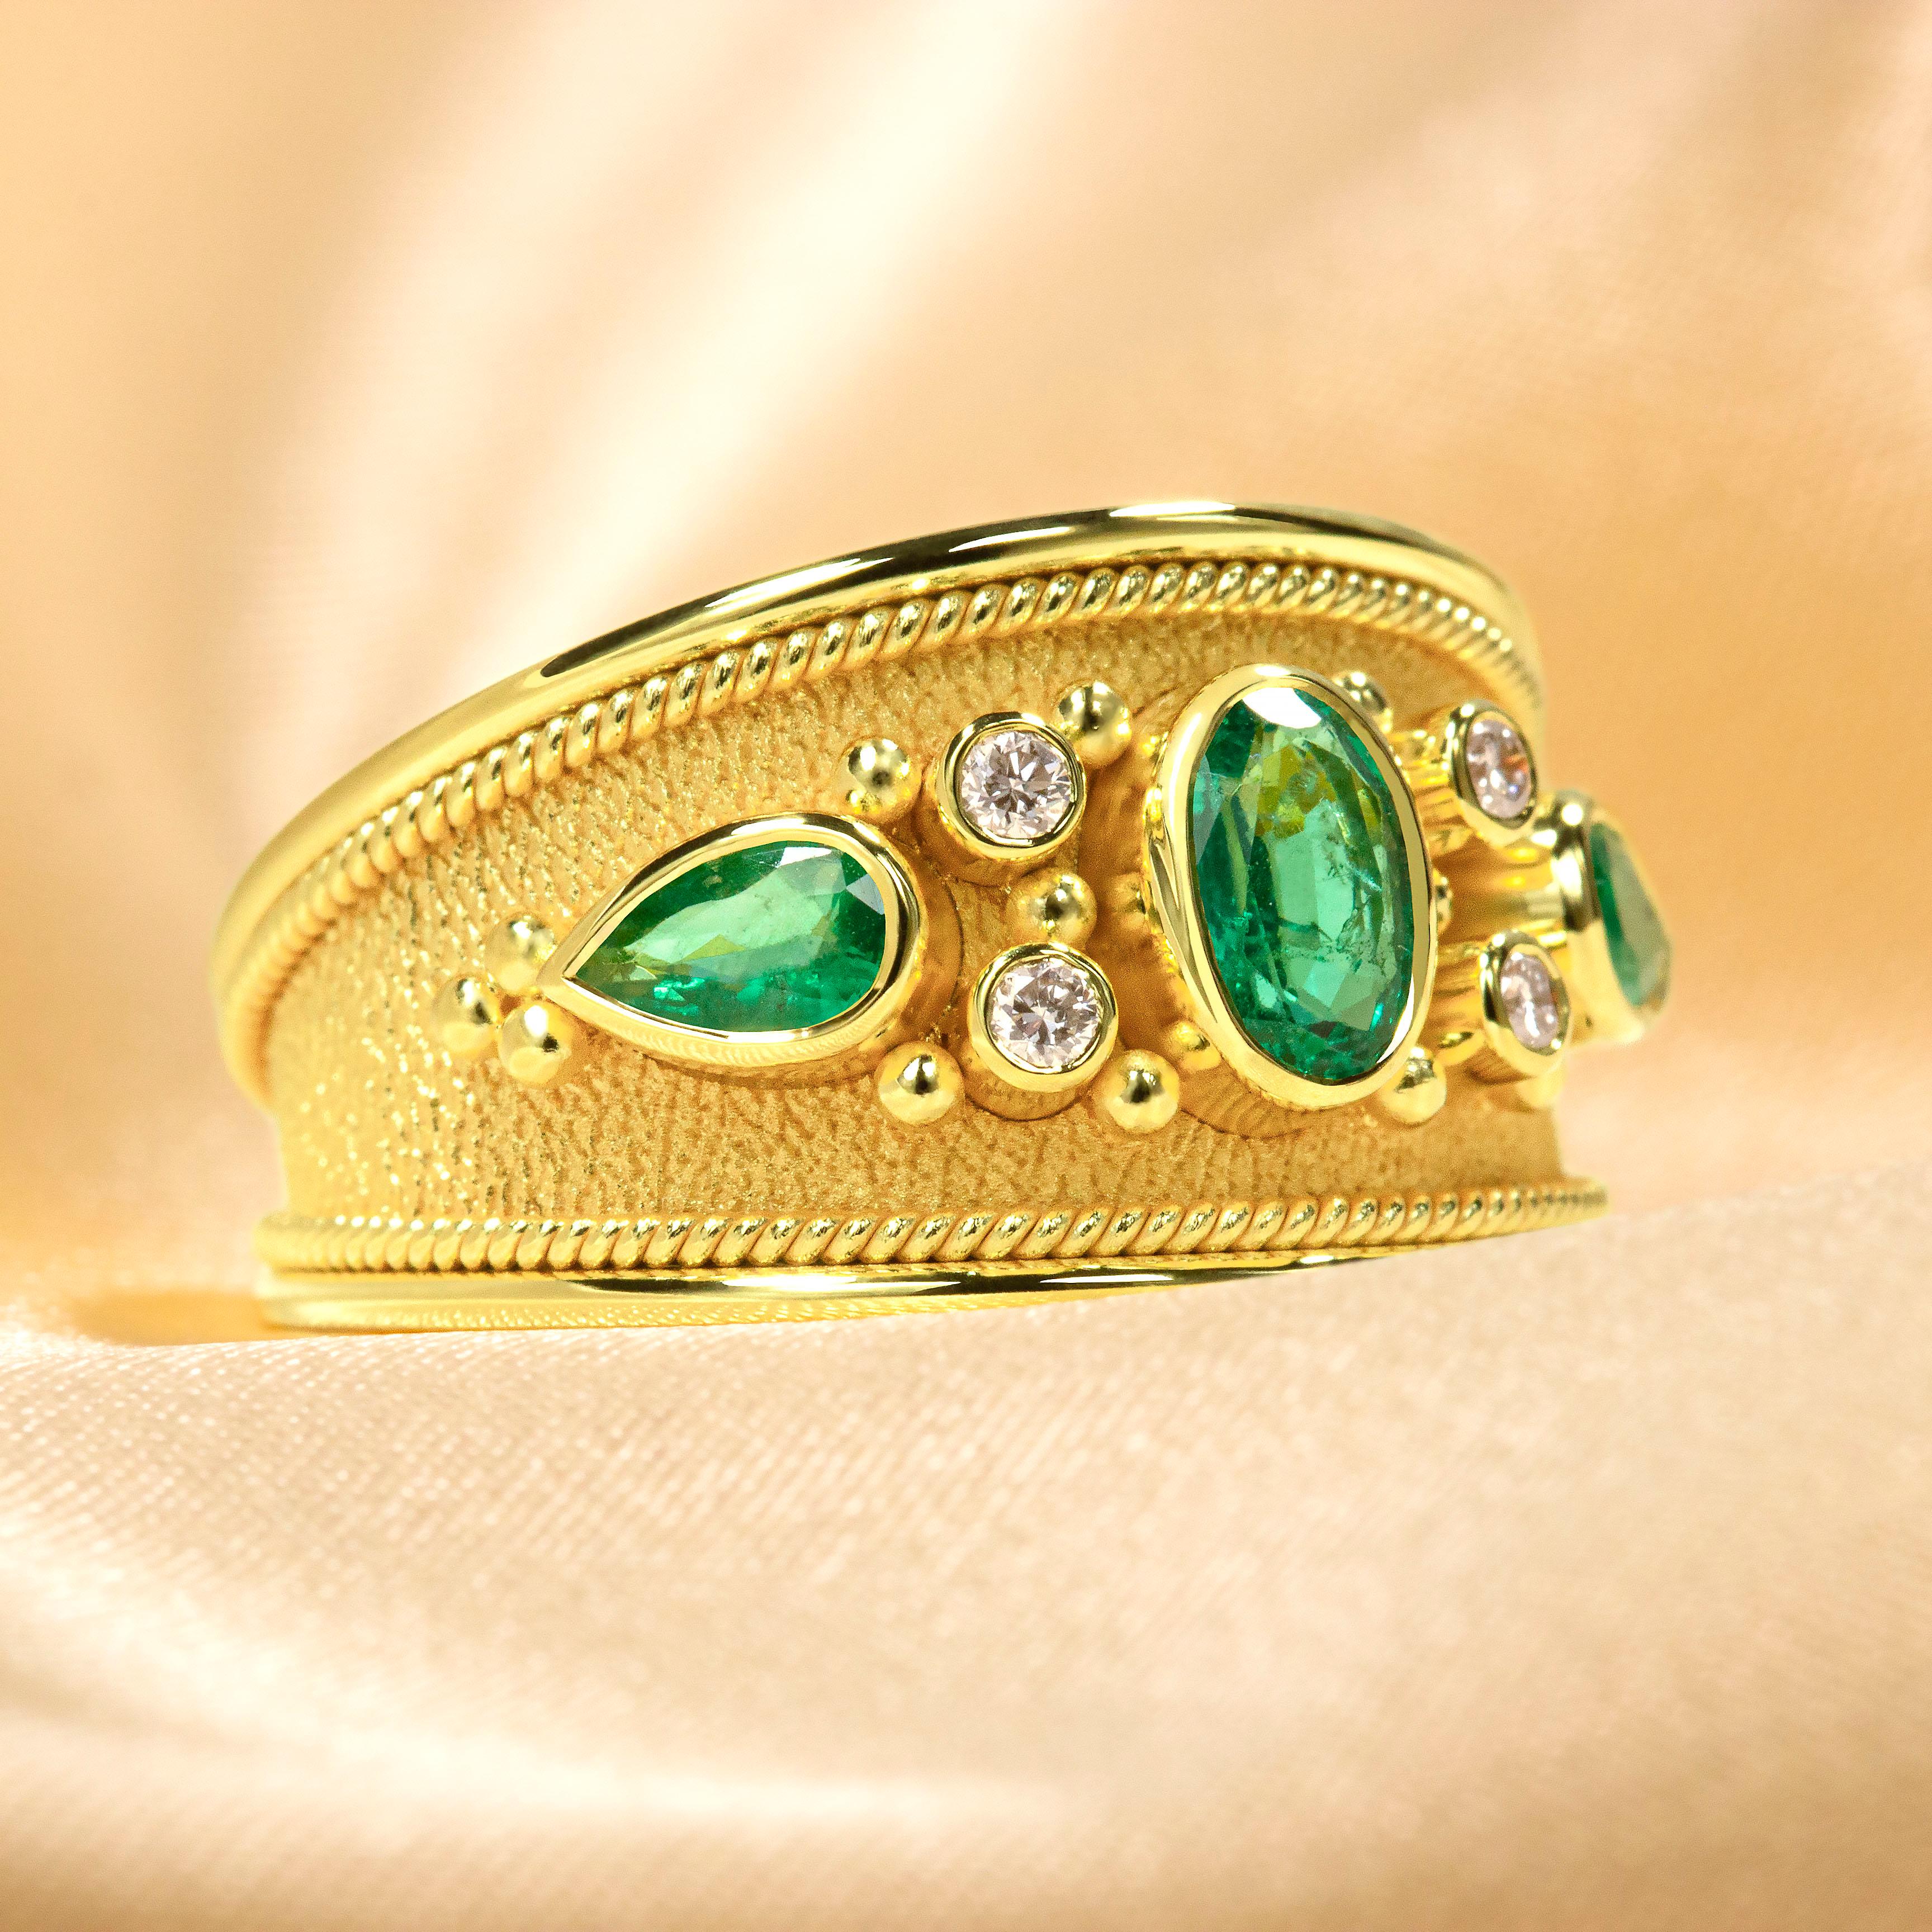 Make an unforgettable entrance with this dazzling gold Emerald Ring - encrusted with dazzling diamonds and fit for royalty! It's the perfect pick to add extravagant style and sparkle to your wardrobe and make an undeniable statement!

100% handmade